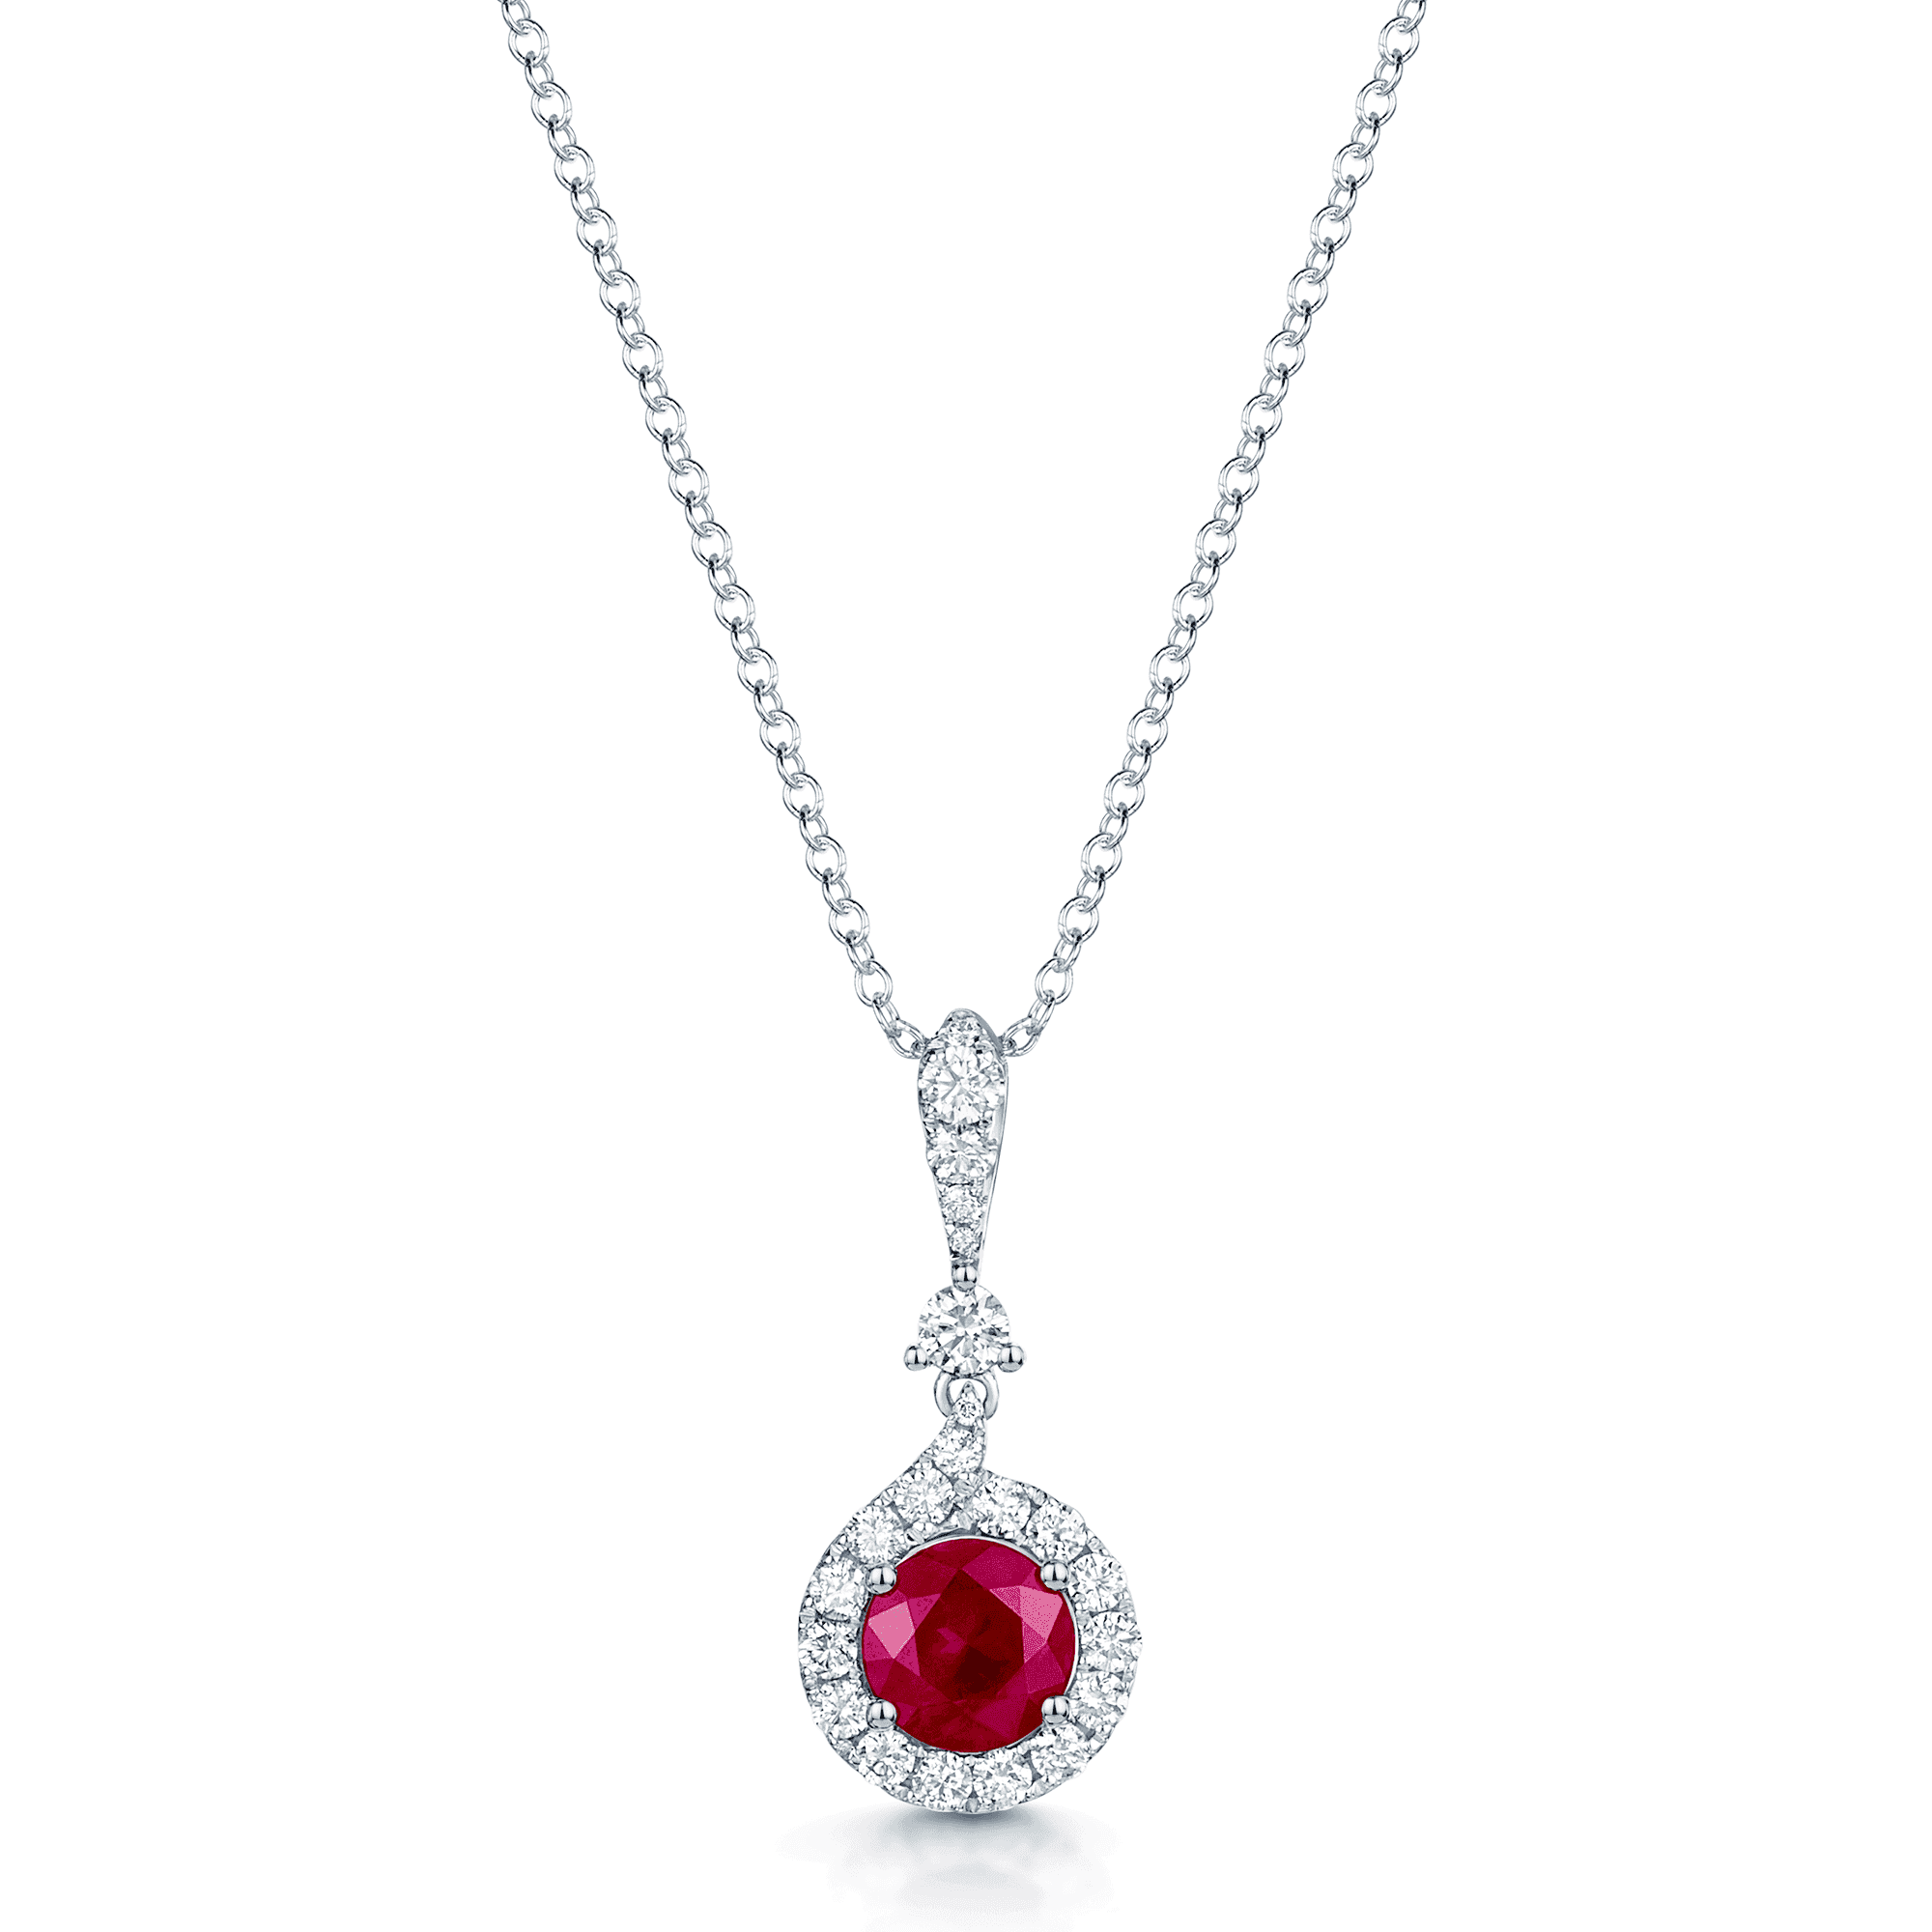 18ct White Gold Round Brilliant Cut Ruby And Diamond Halo Pendant With A Diamond Bale